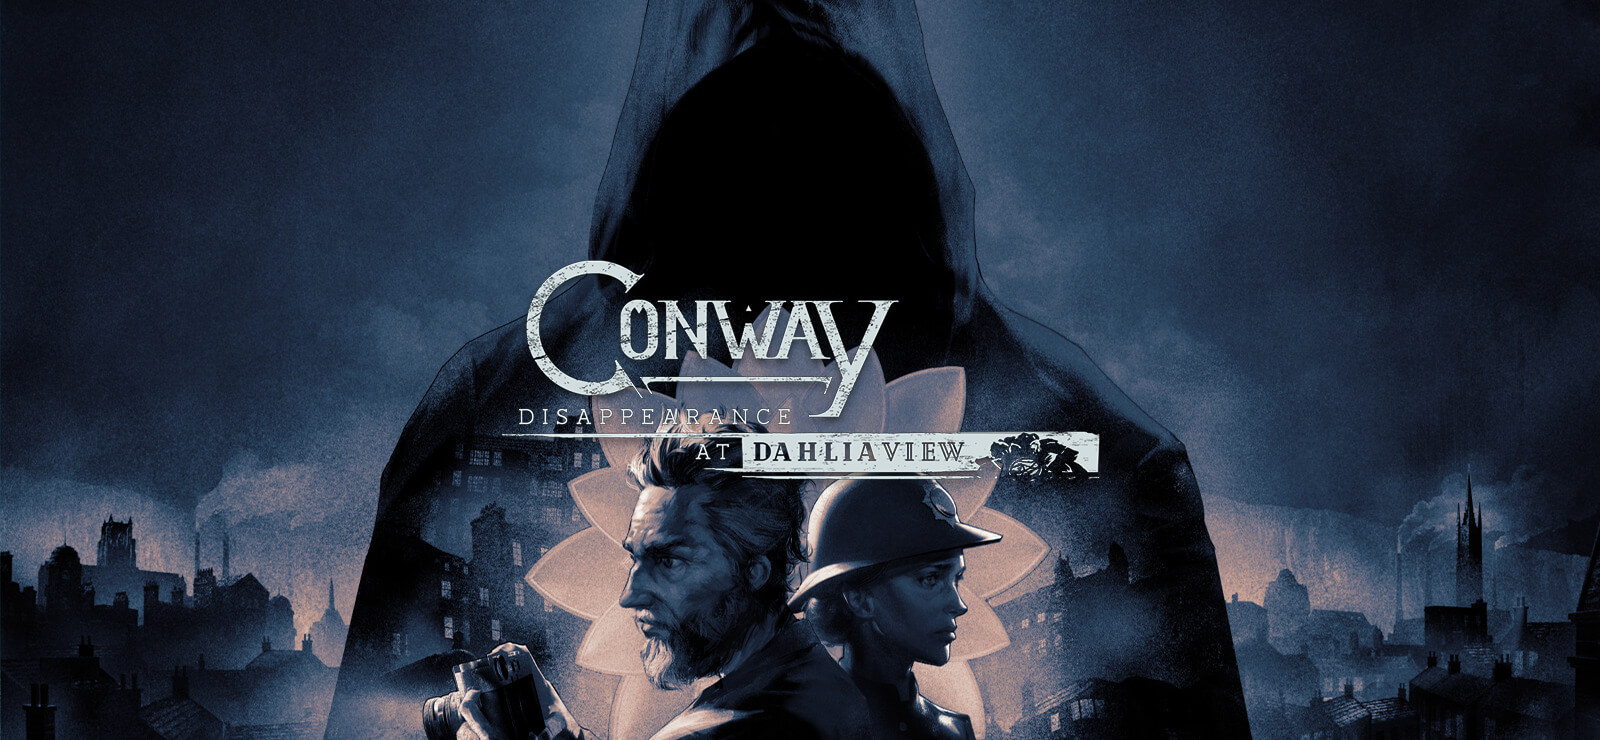 Conway Banner Image